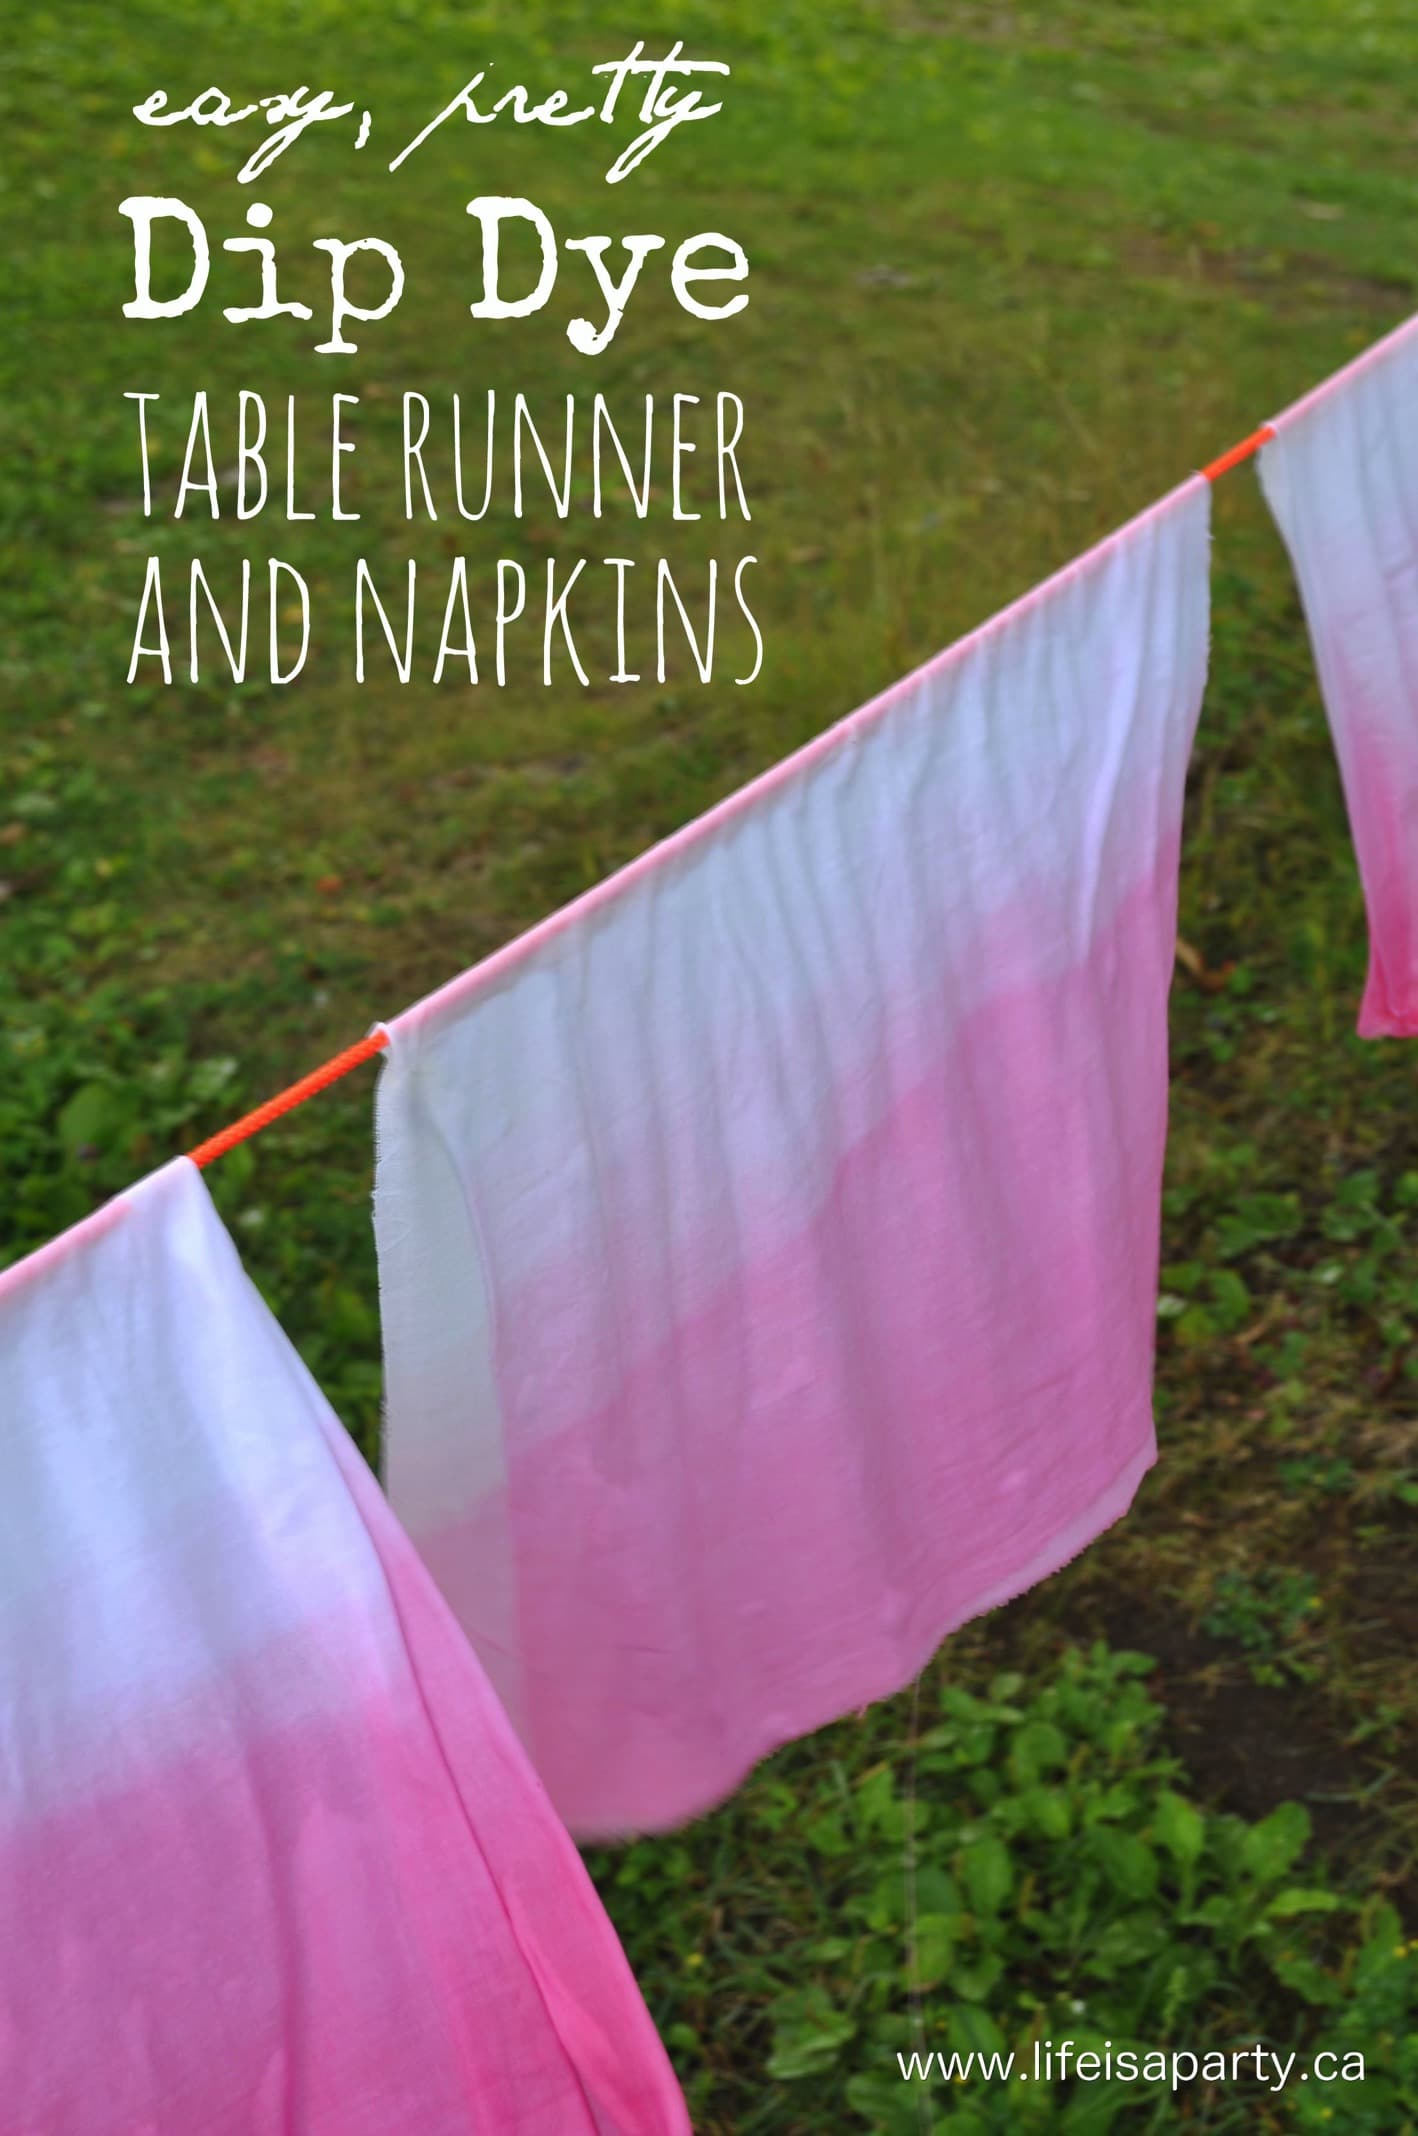 Dip Dye Table Runner and Napkins: Easy how-to instructions to make your own table runner and napkins with a beautiful dip dyed ombre effect. Perfect for entertaining and really simple to diy.